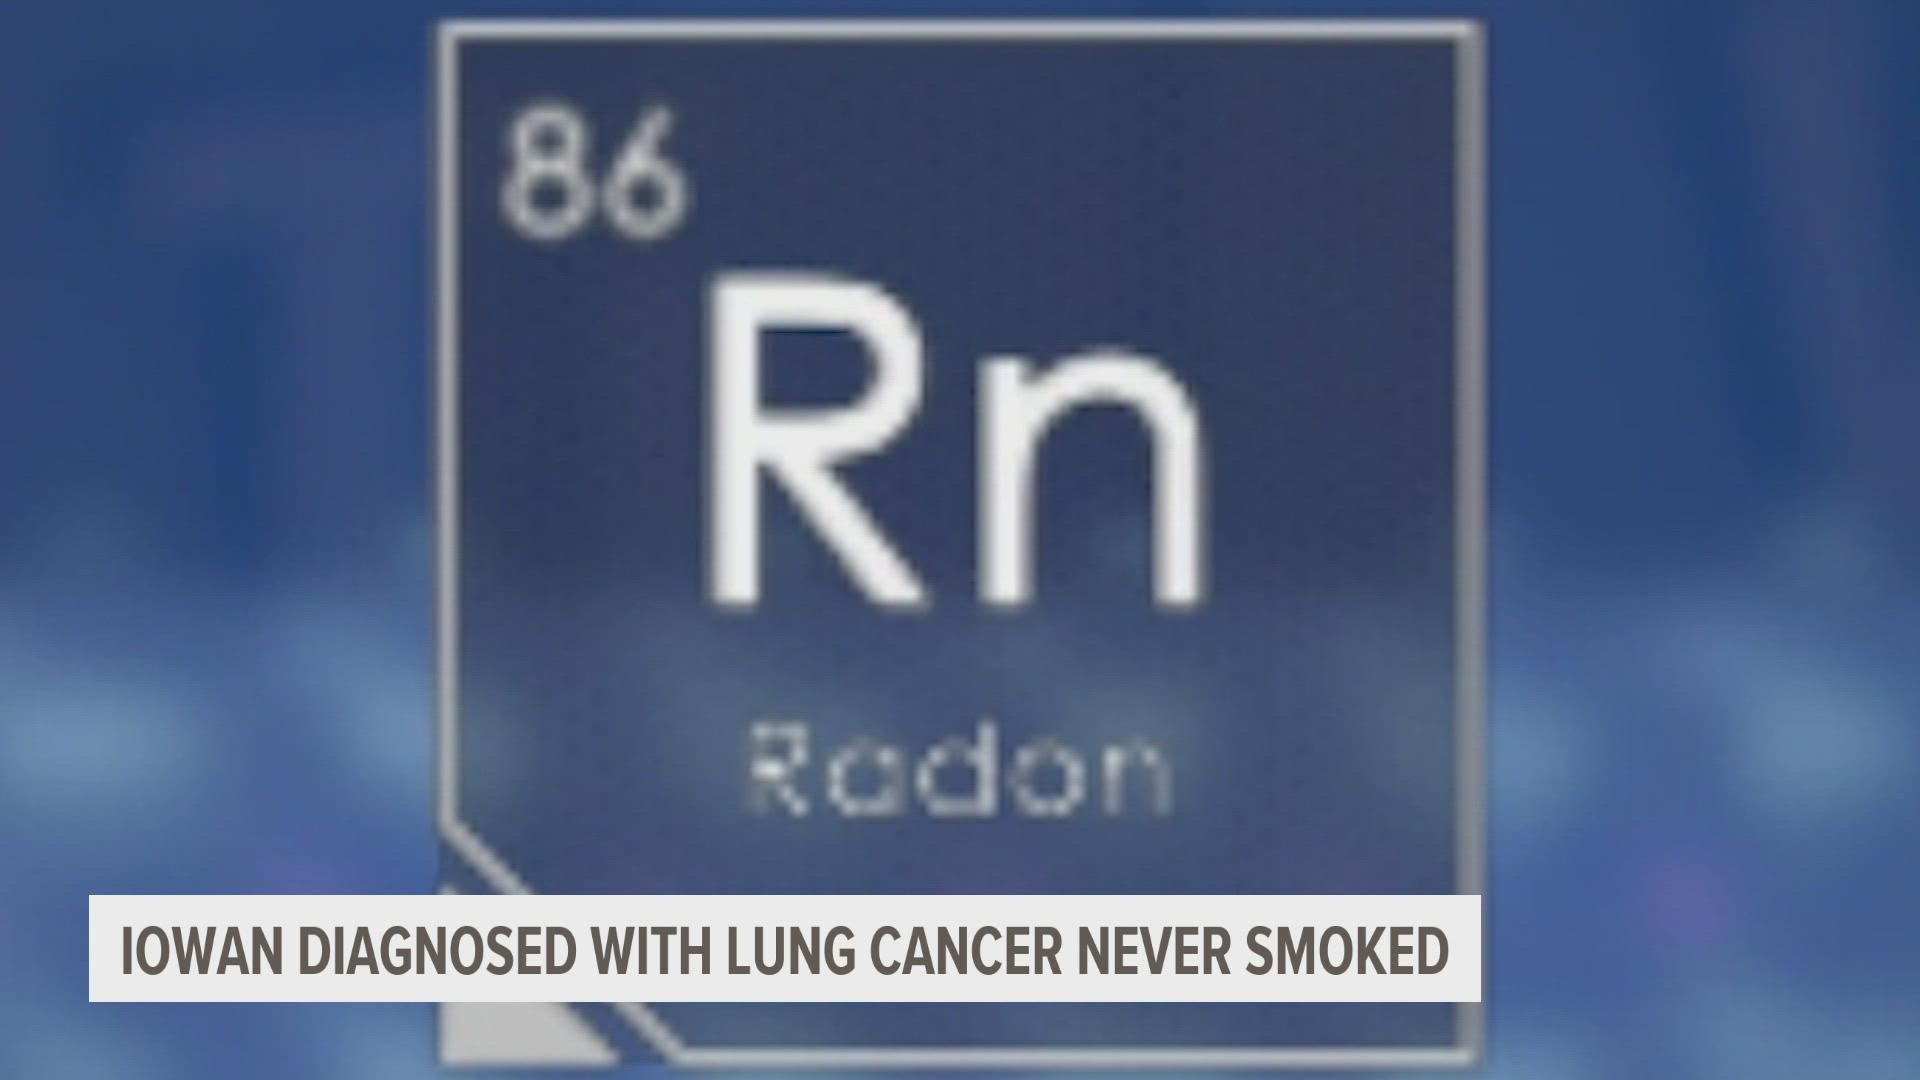 Local 5 spoke with Iowans forever changed by radon, experts dedicated to educating Iowans on its dangers, and state officials working to address the problem.